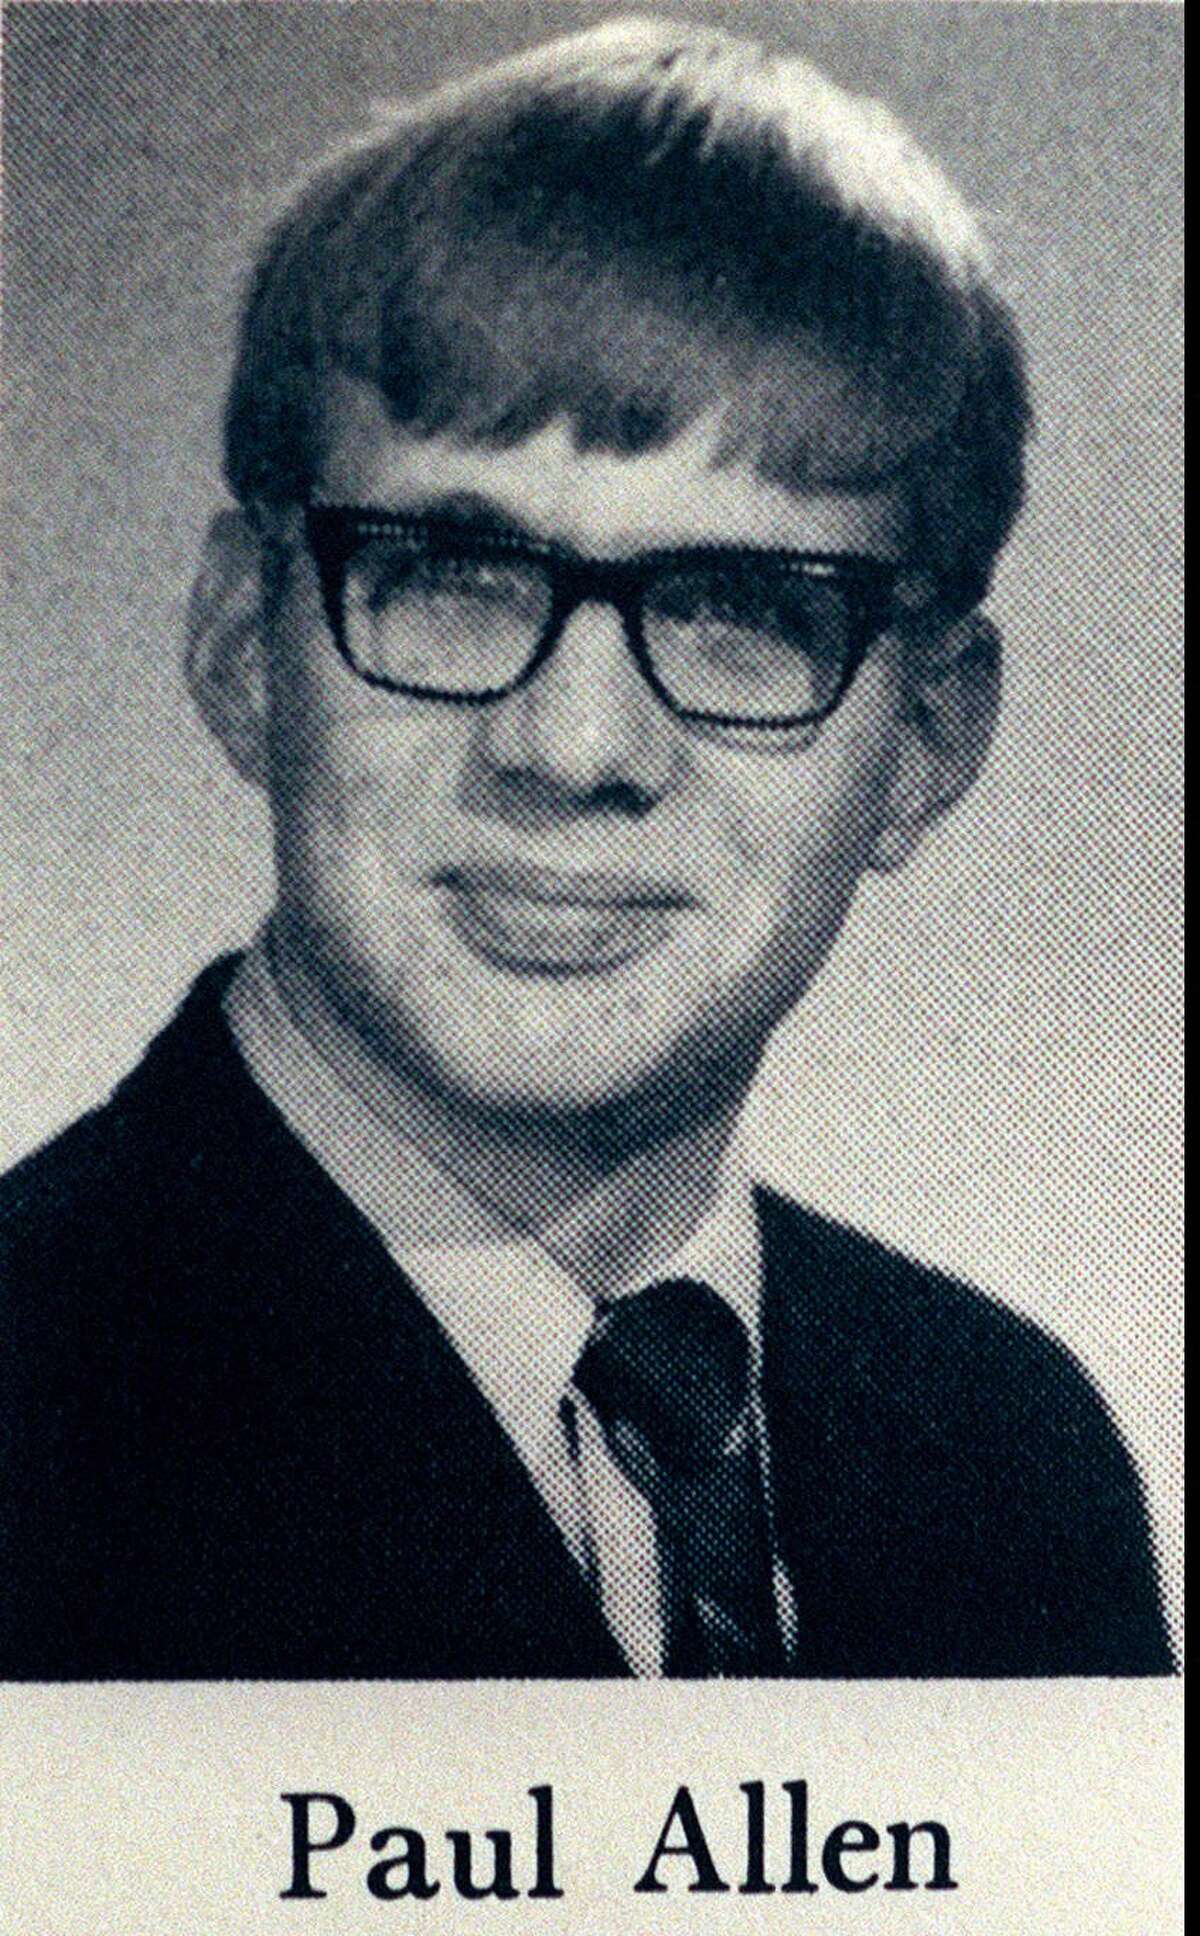 This is a copy Photo of Paul Allen's 1969 sophomore yearbook photo at Lakeside School. copy photo by Grant M. Haller